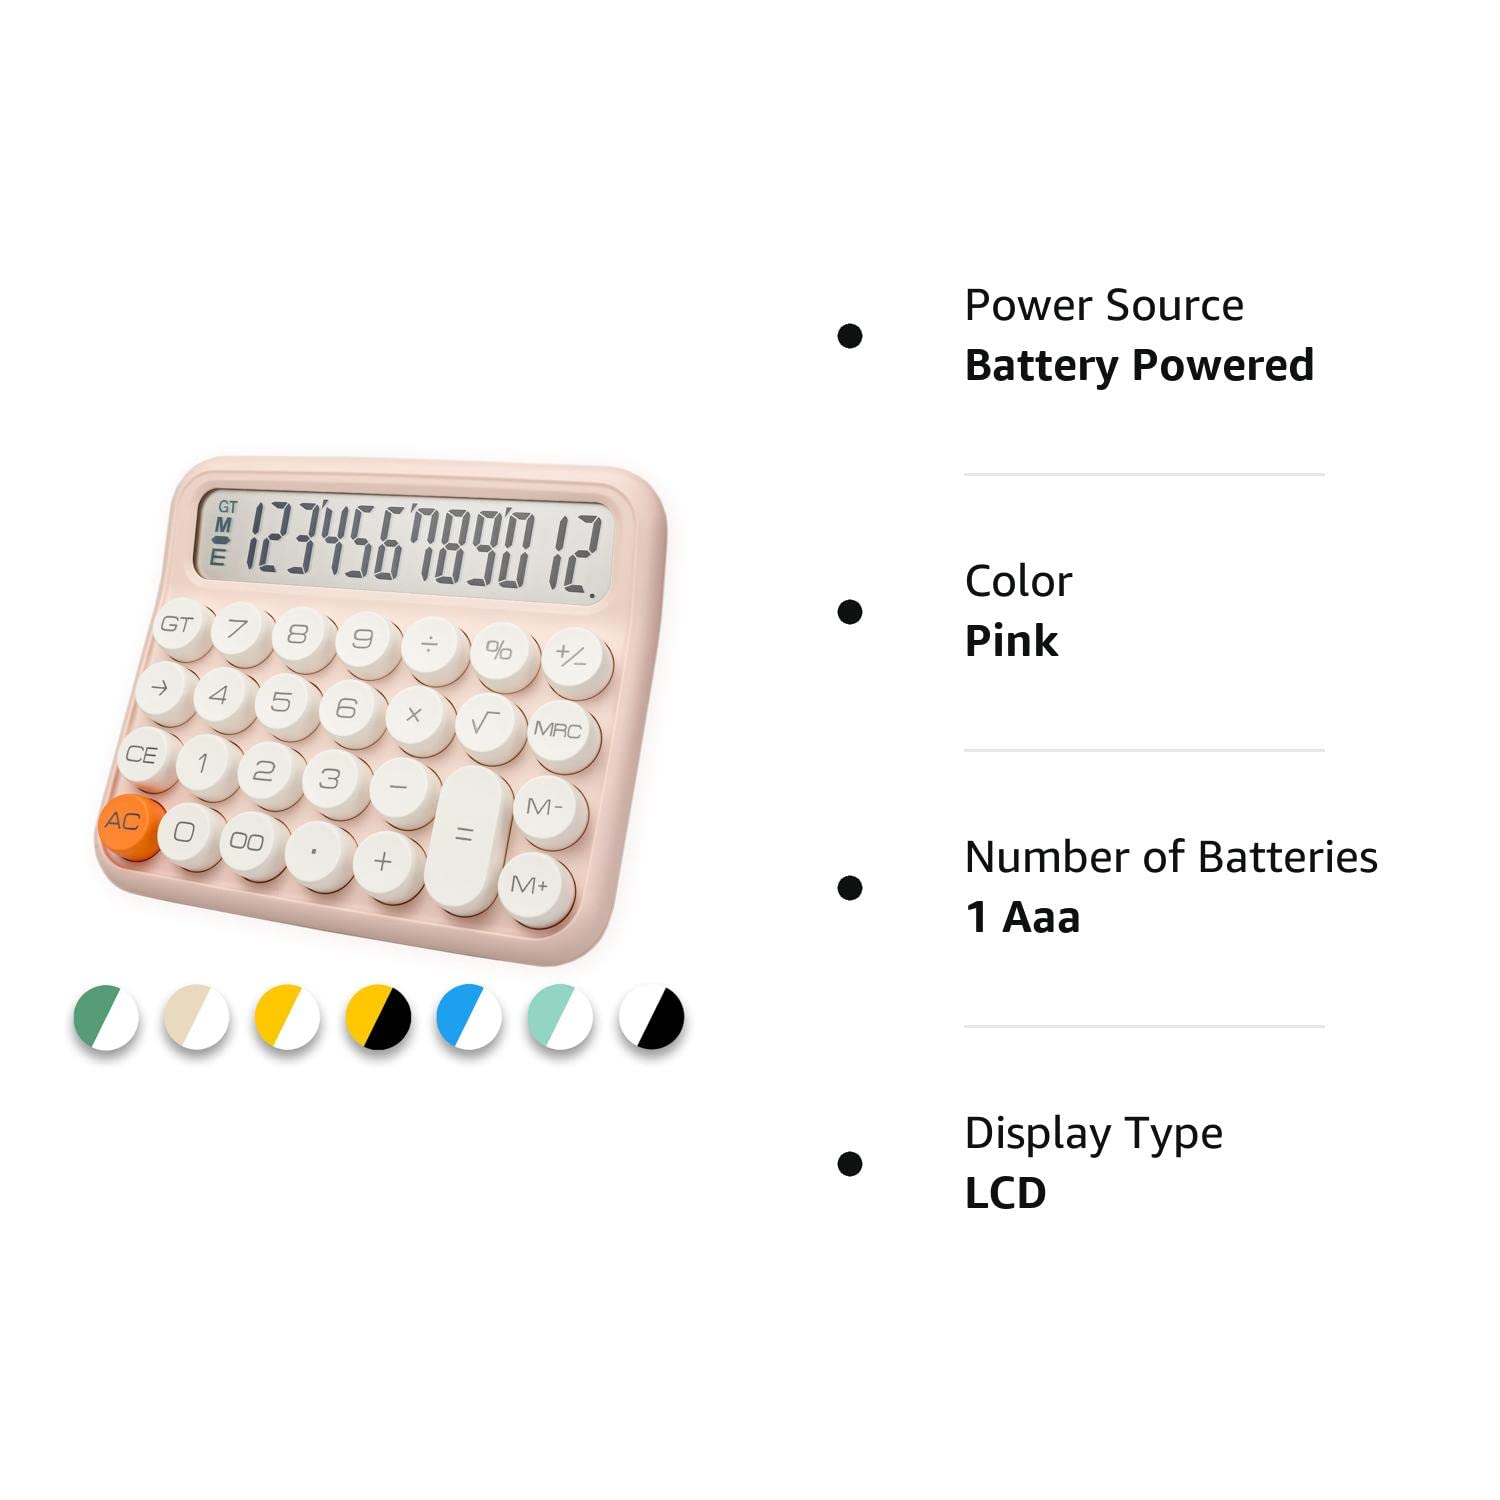 Standard Calculator 12 Digit,Desktop Large Display and Buttons,Pink Calculator with Large LCD Display for Office,School, Home & Business Use,Automatic Sleep,with Battery.6 * 5.15in